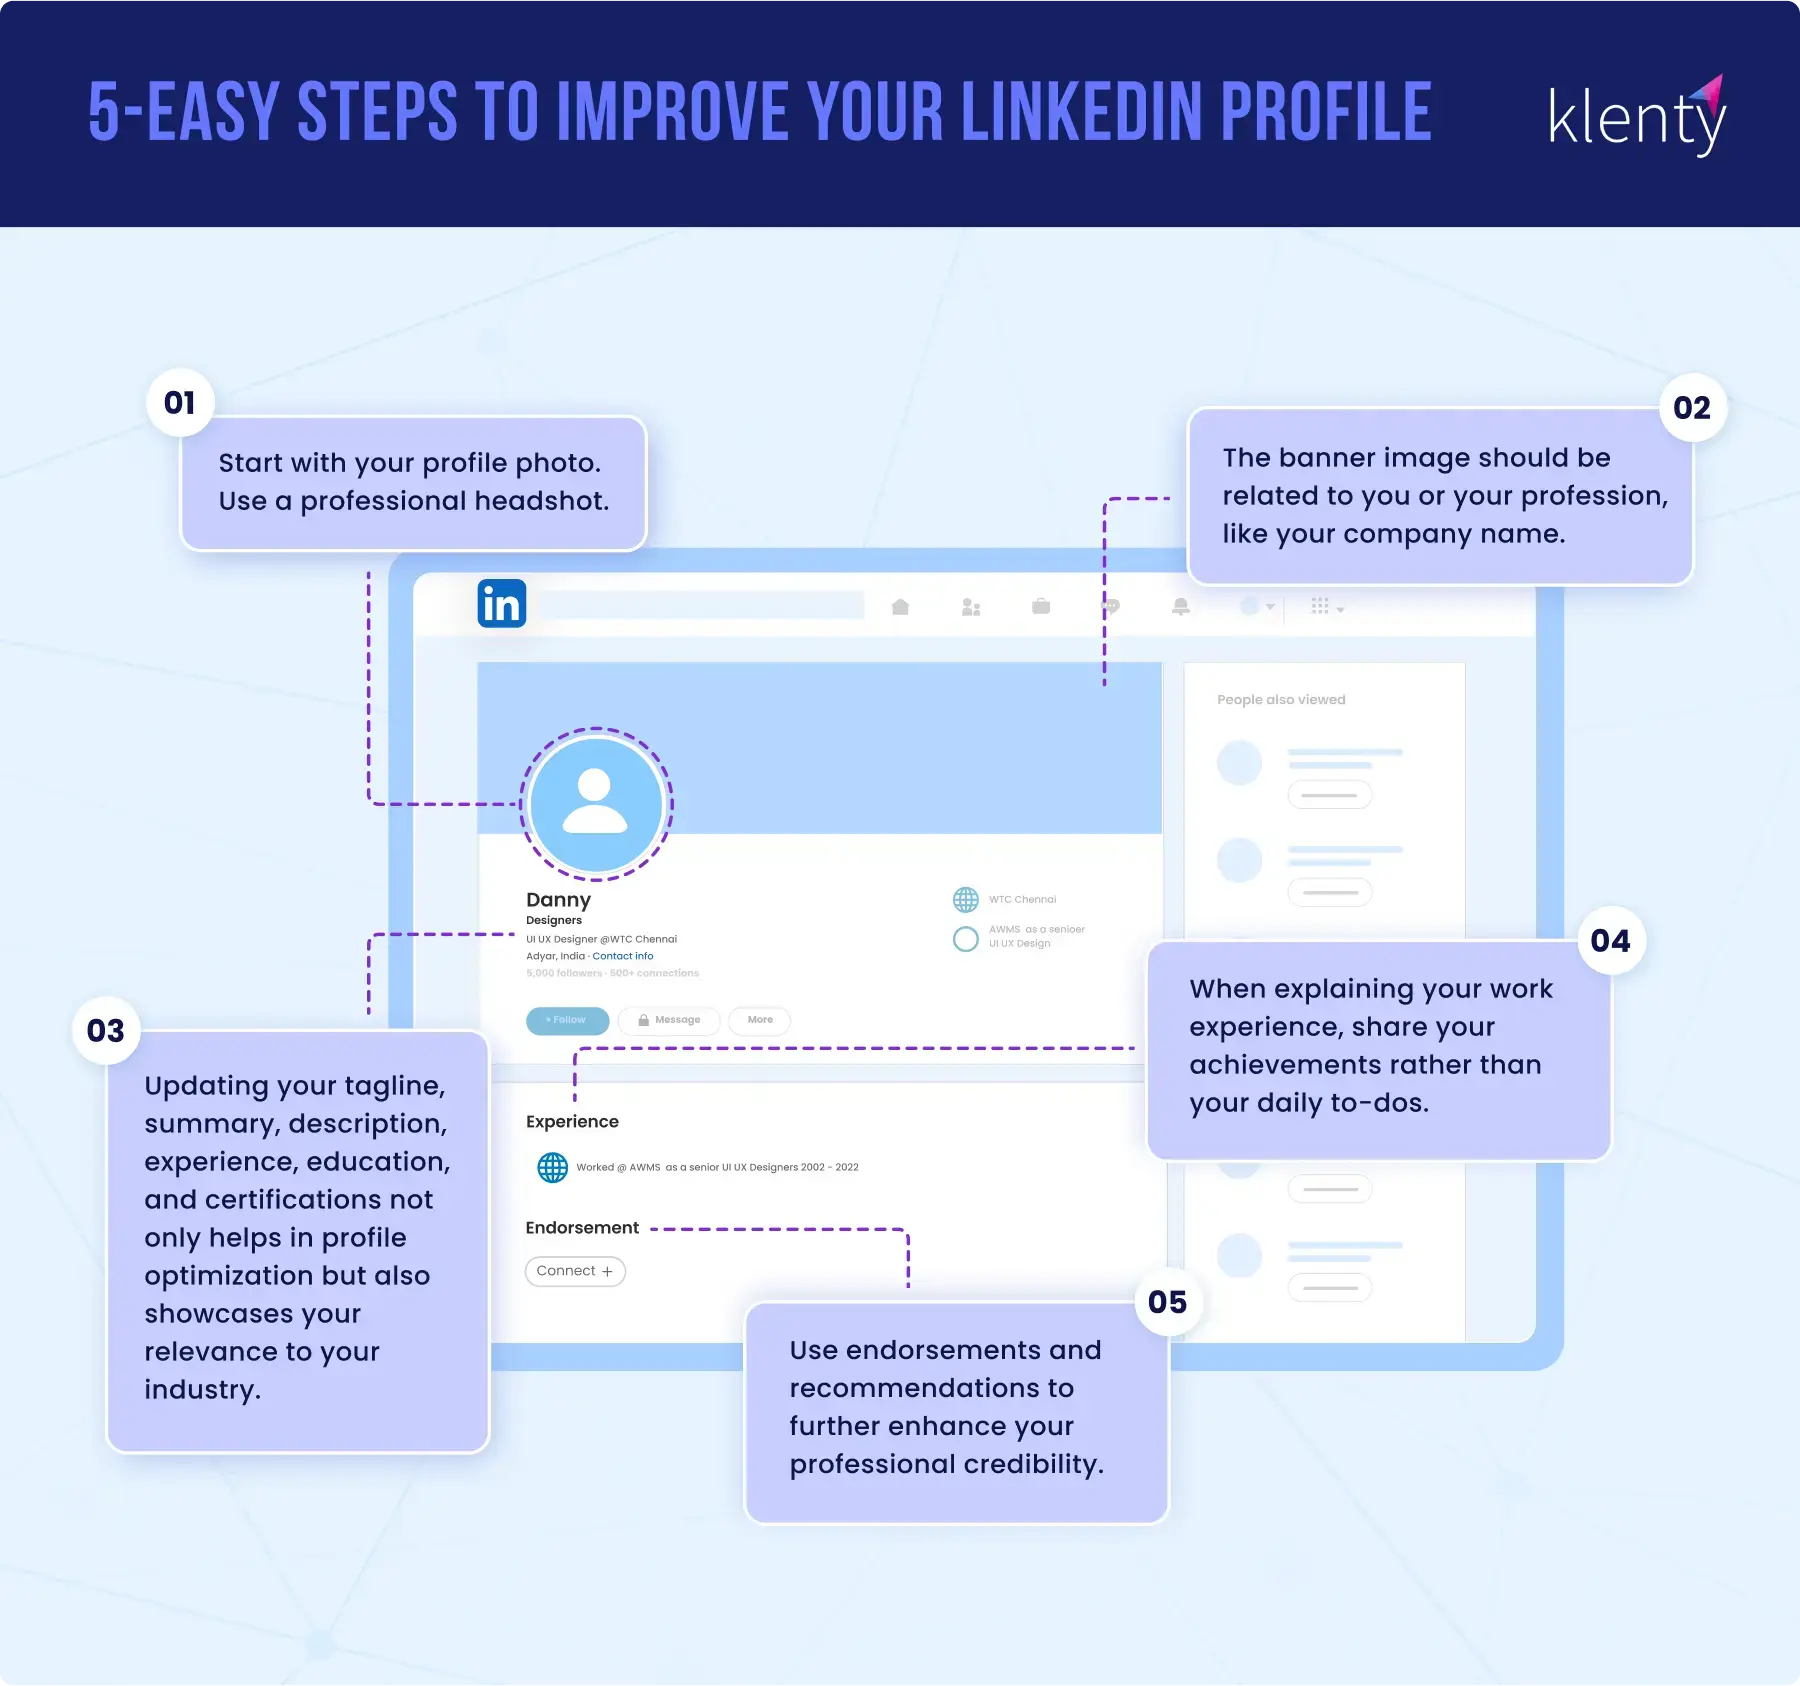 Infographic for 5 best ways to improve your LinkedIn profile"